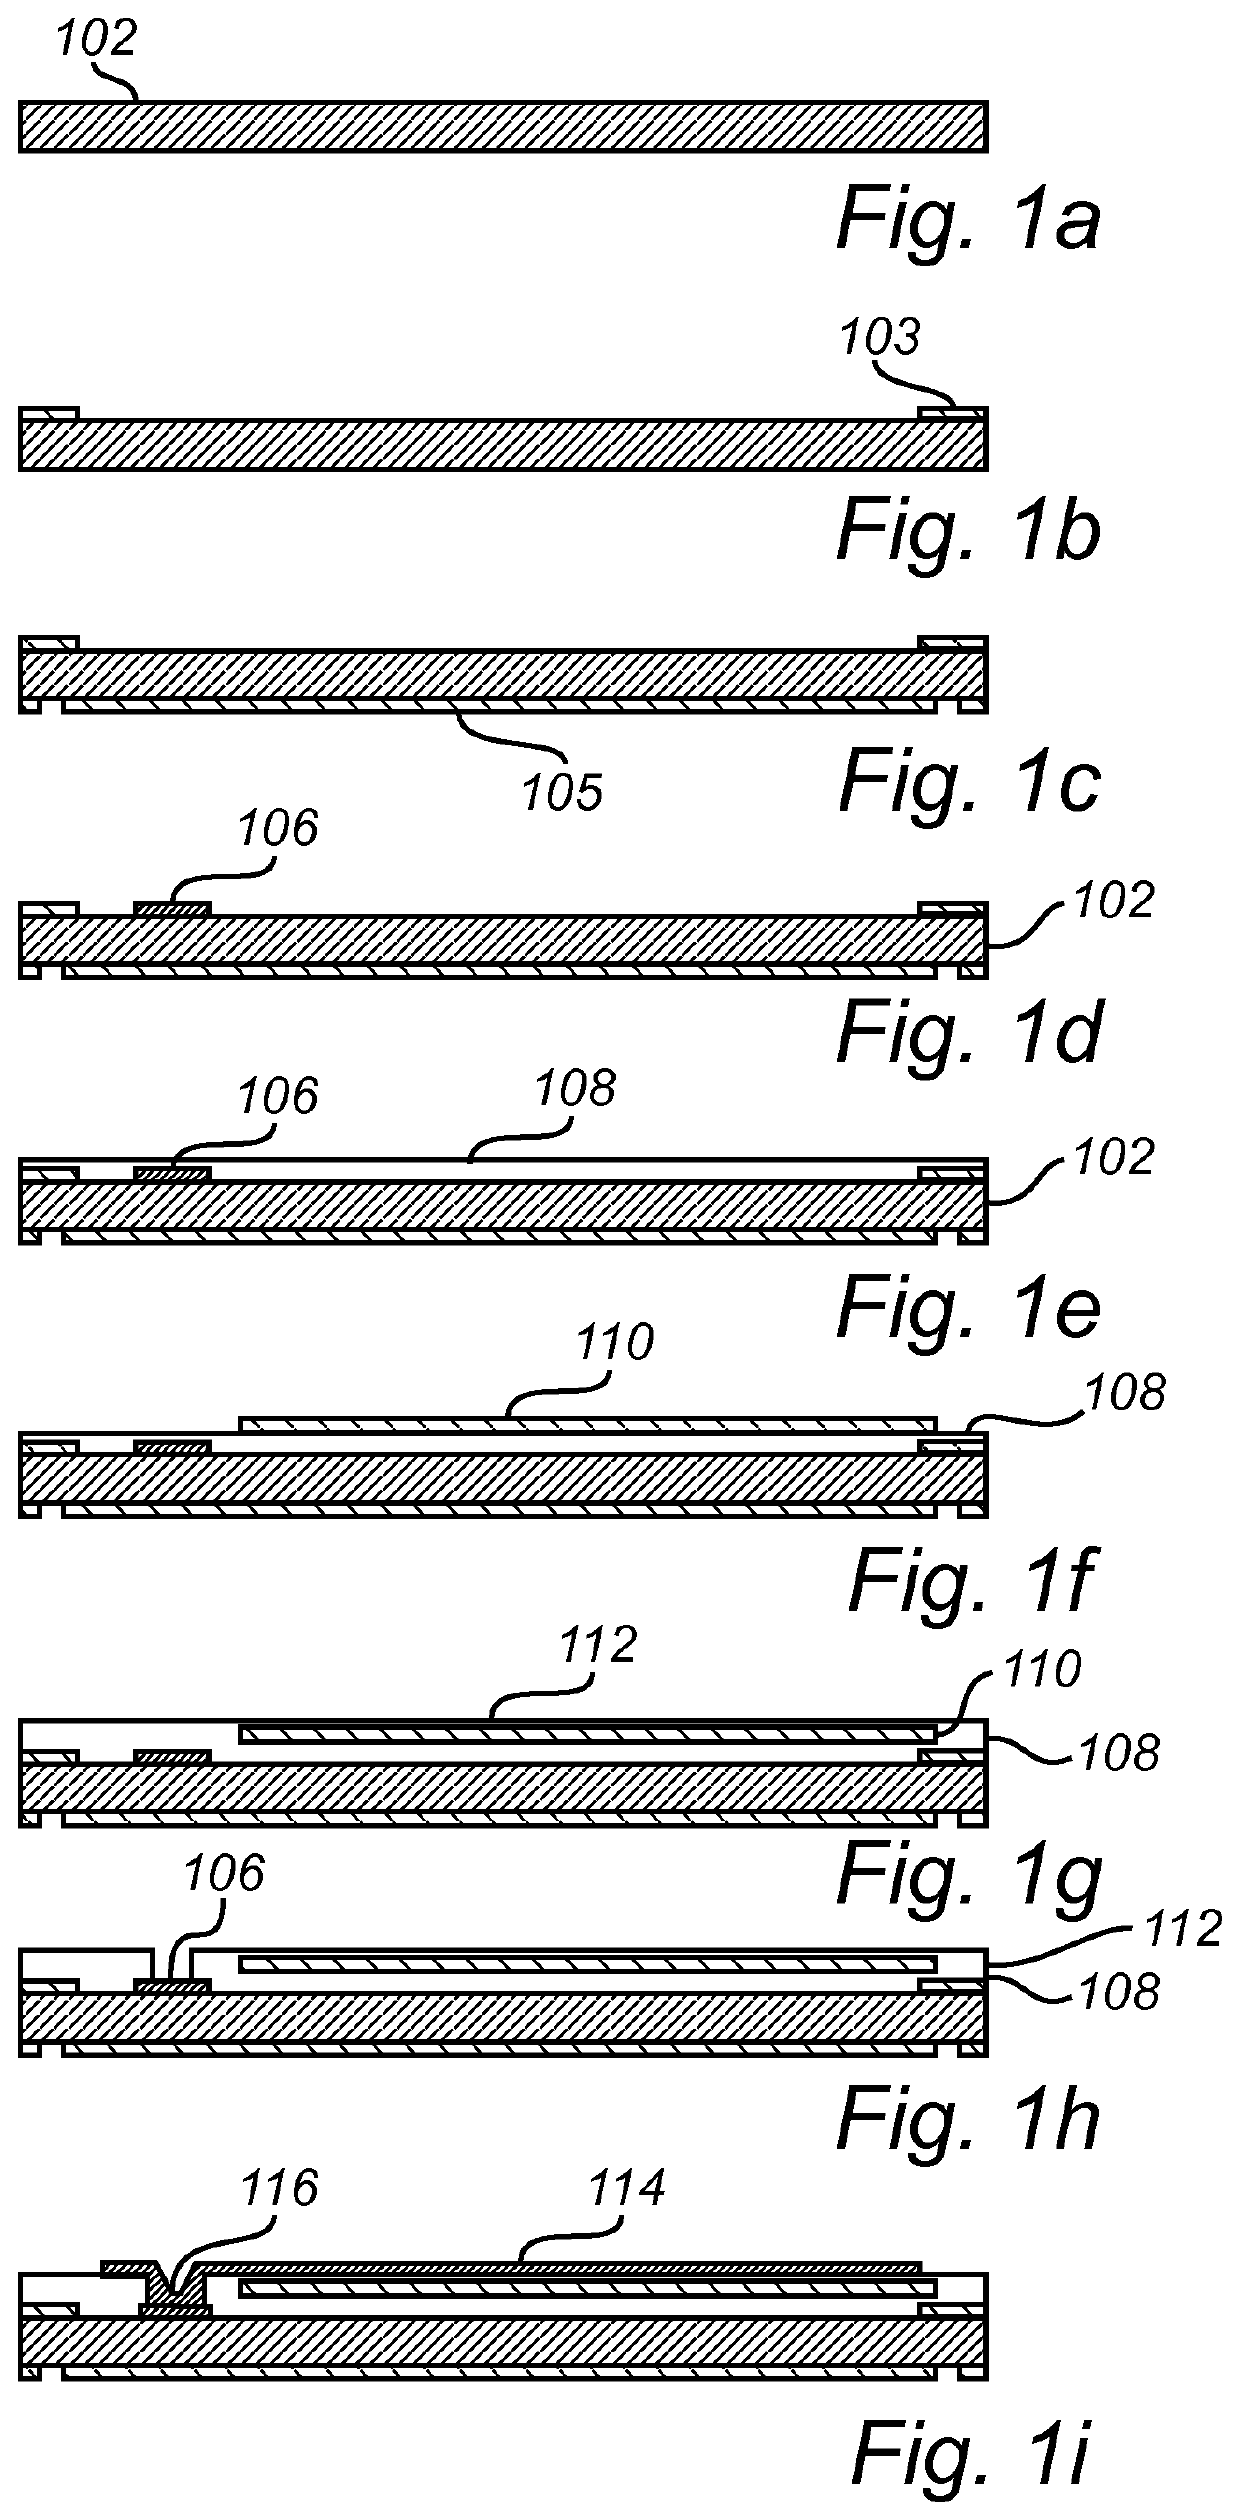 Unfoldable layered connection, and method for manufacturing an unfoldable layered connection